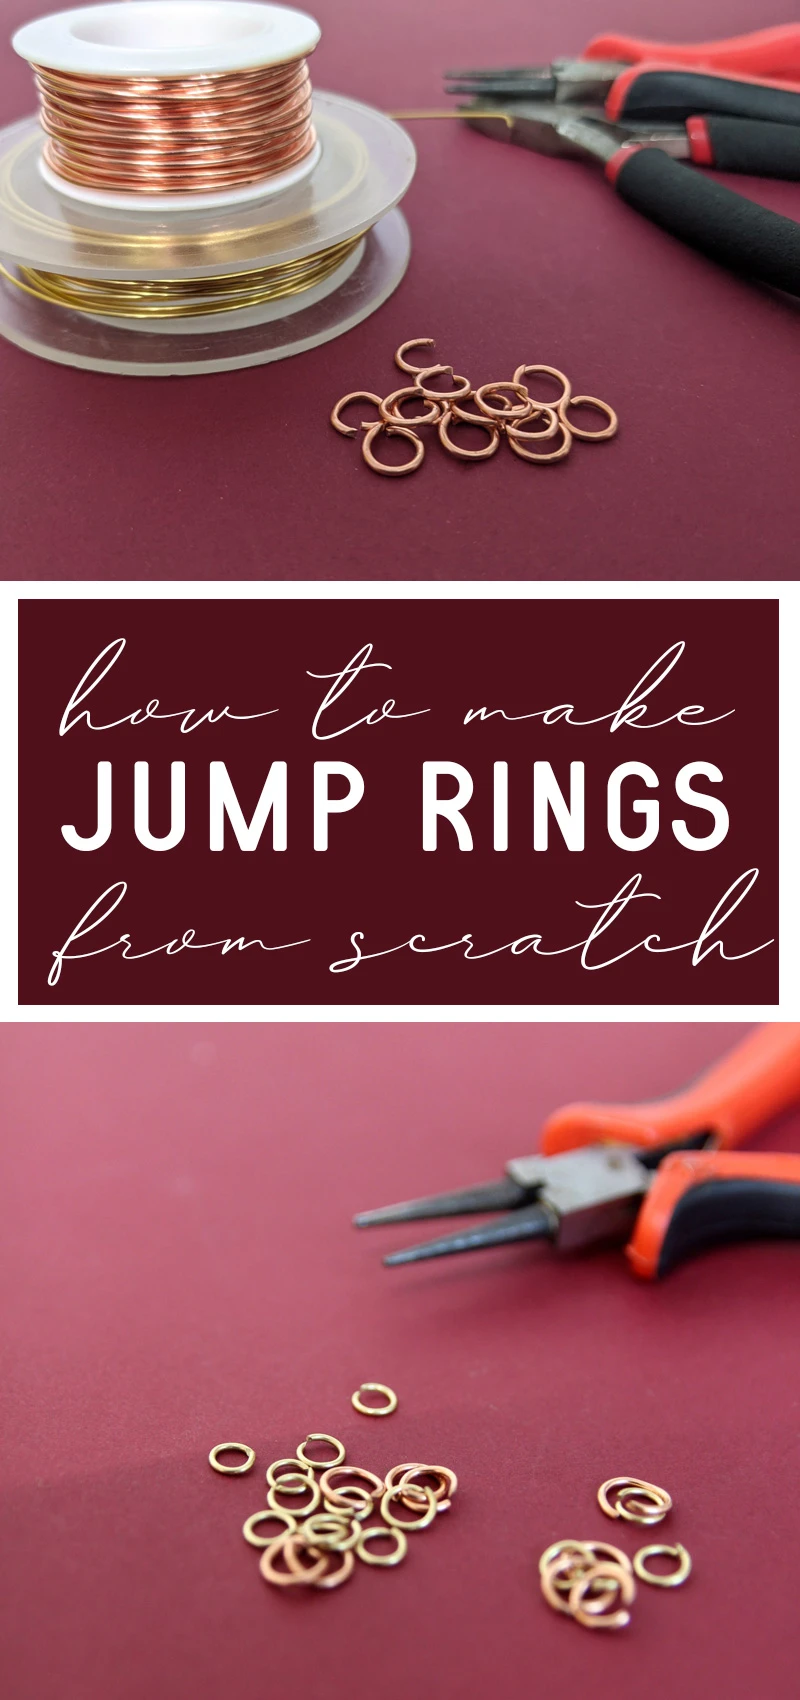 How to make jump rings hero collage